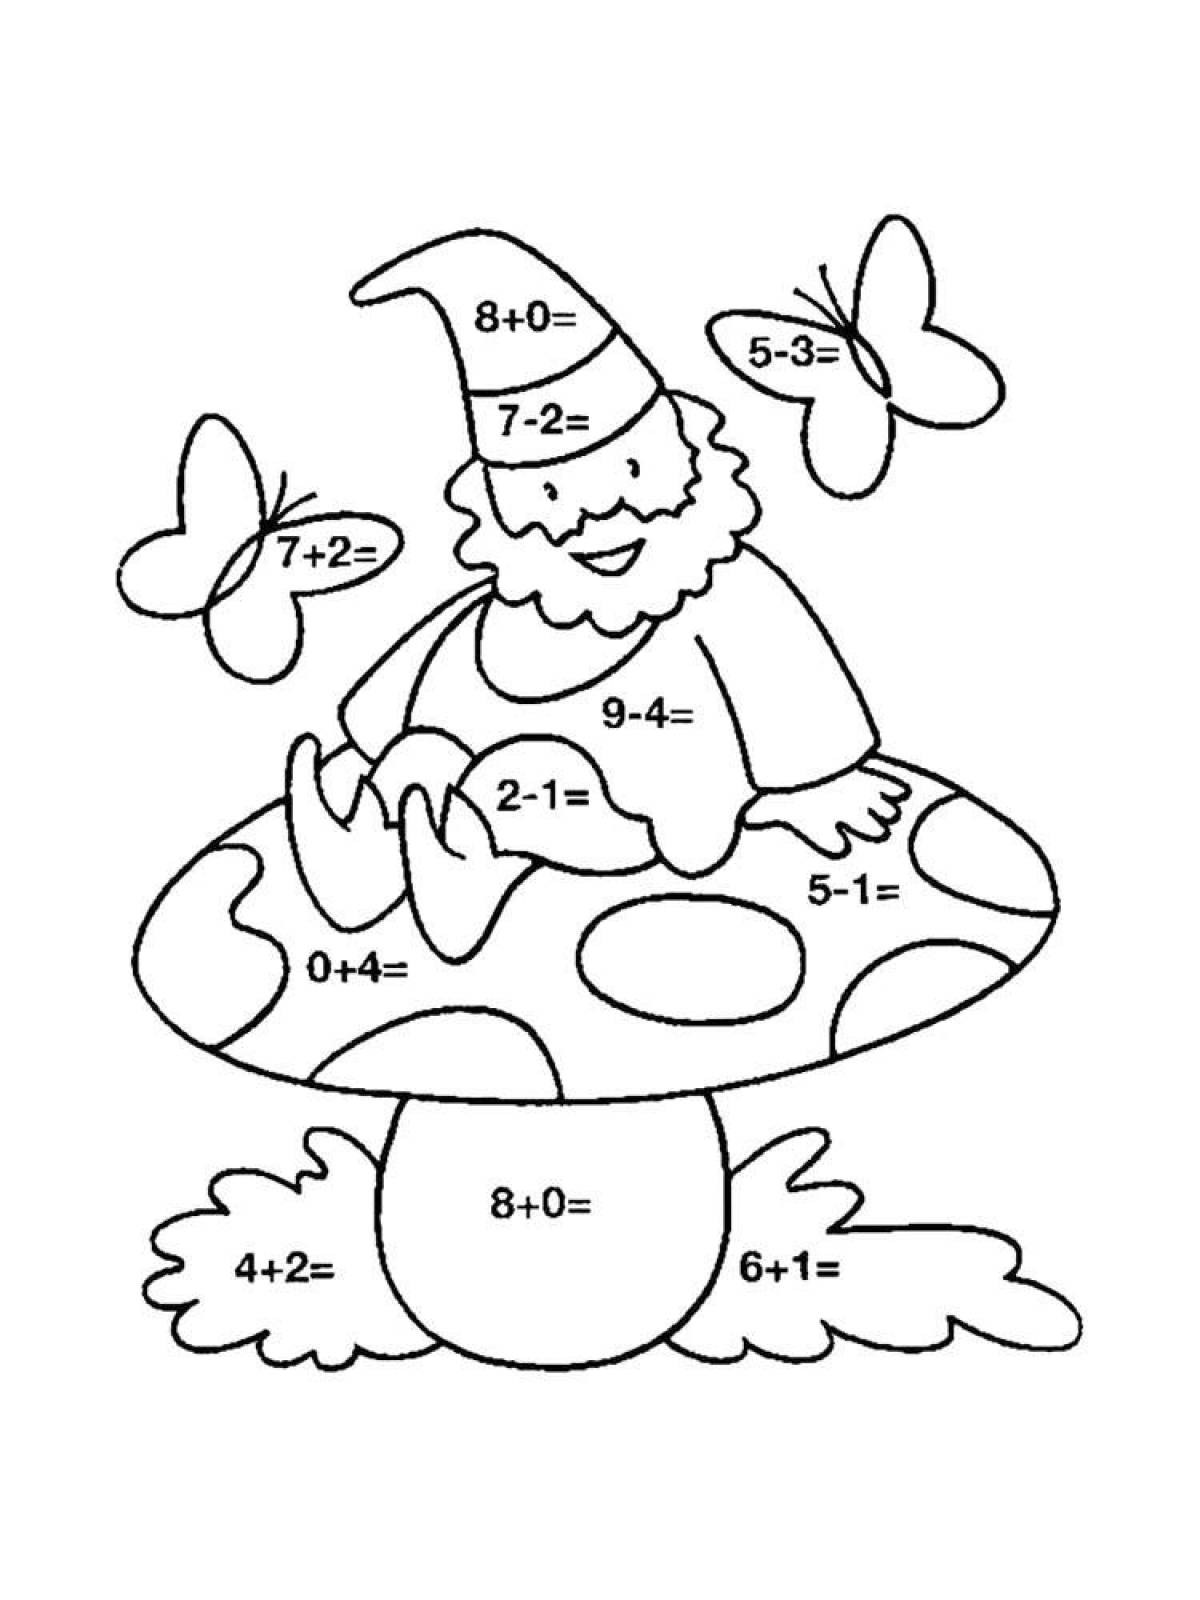 High color score on 10 coloring pages